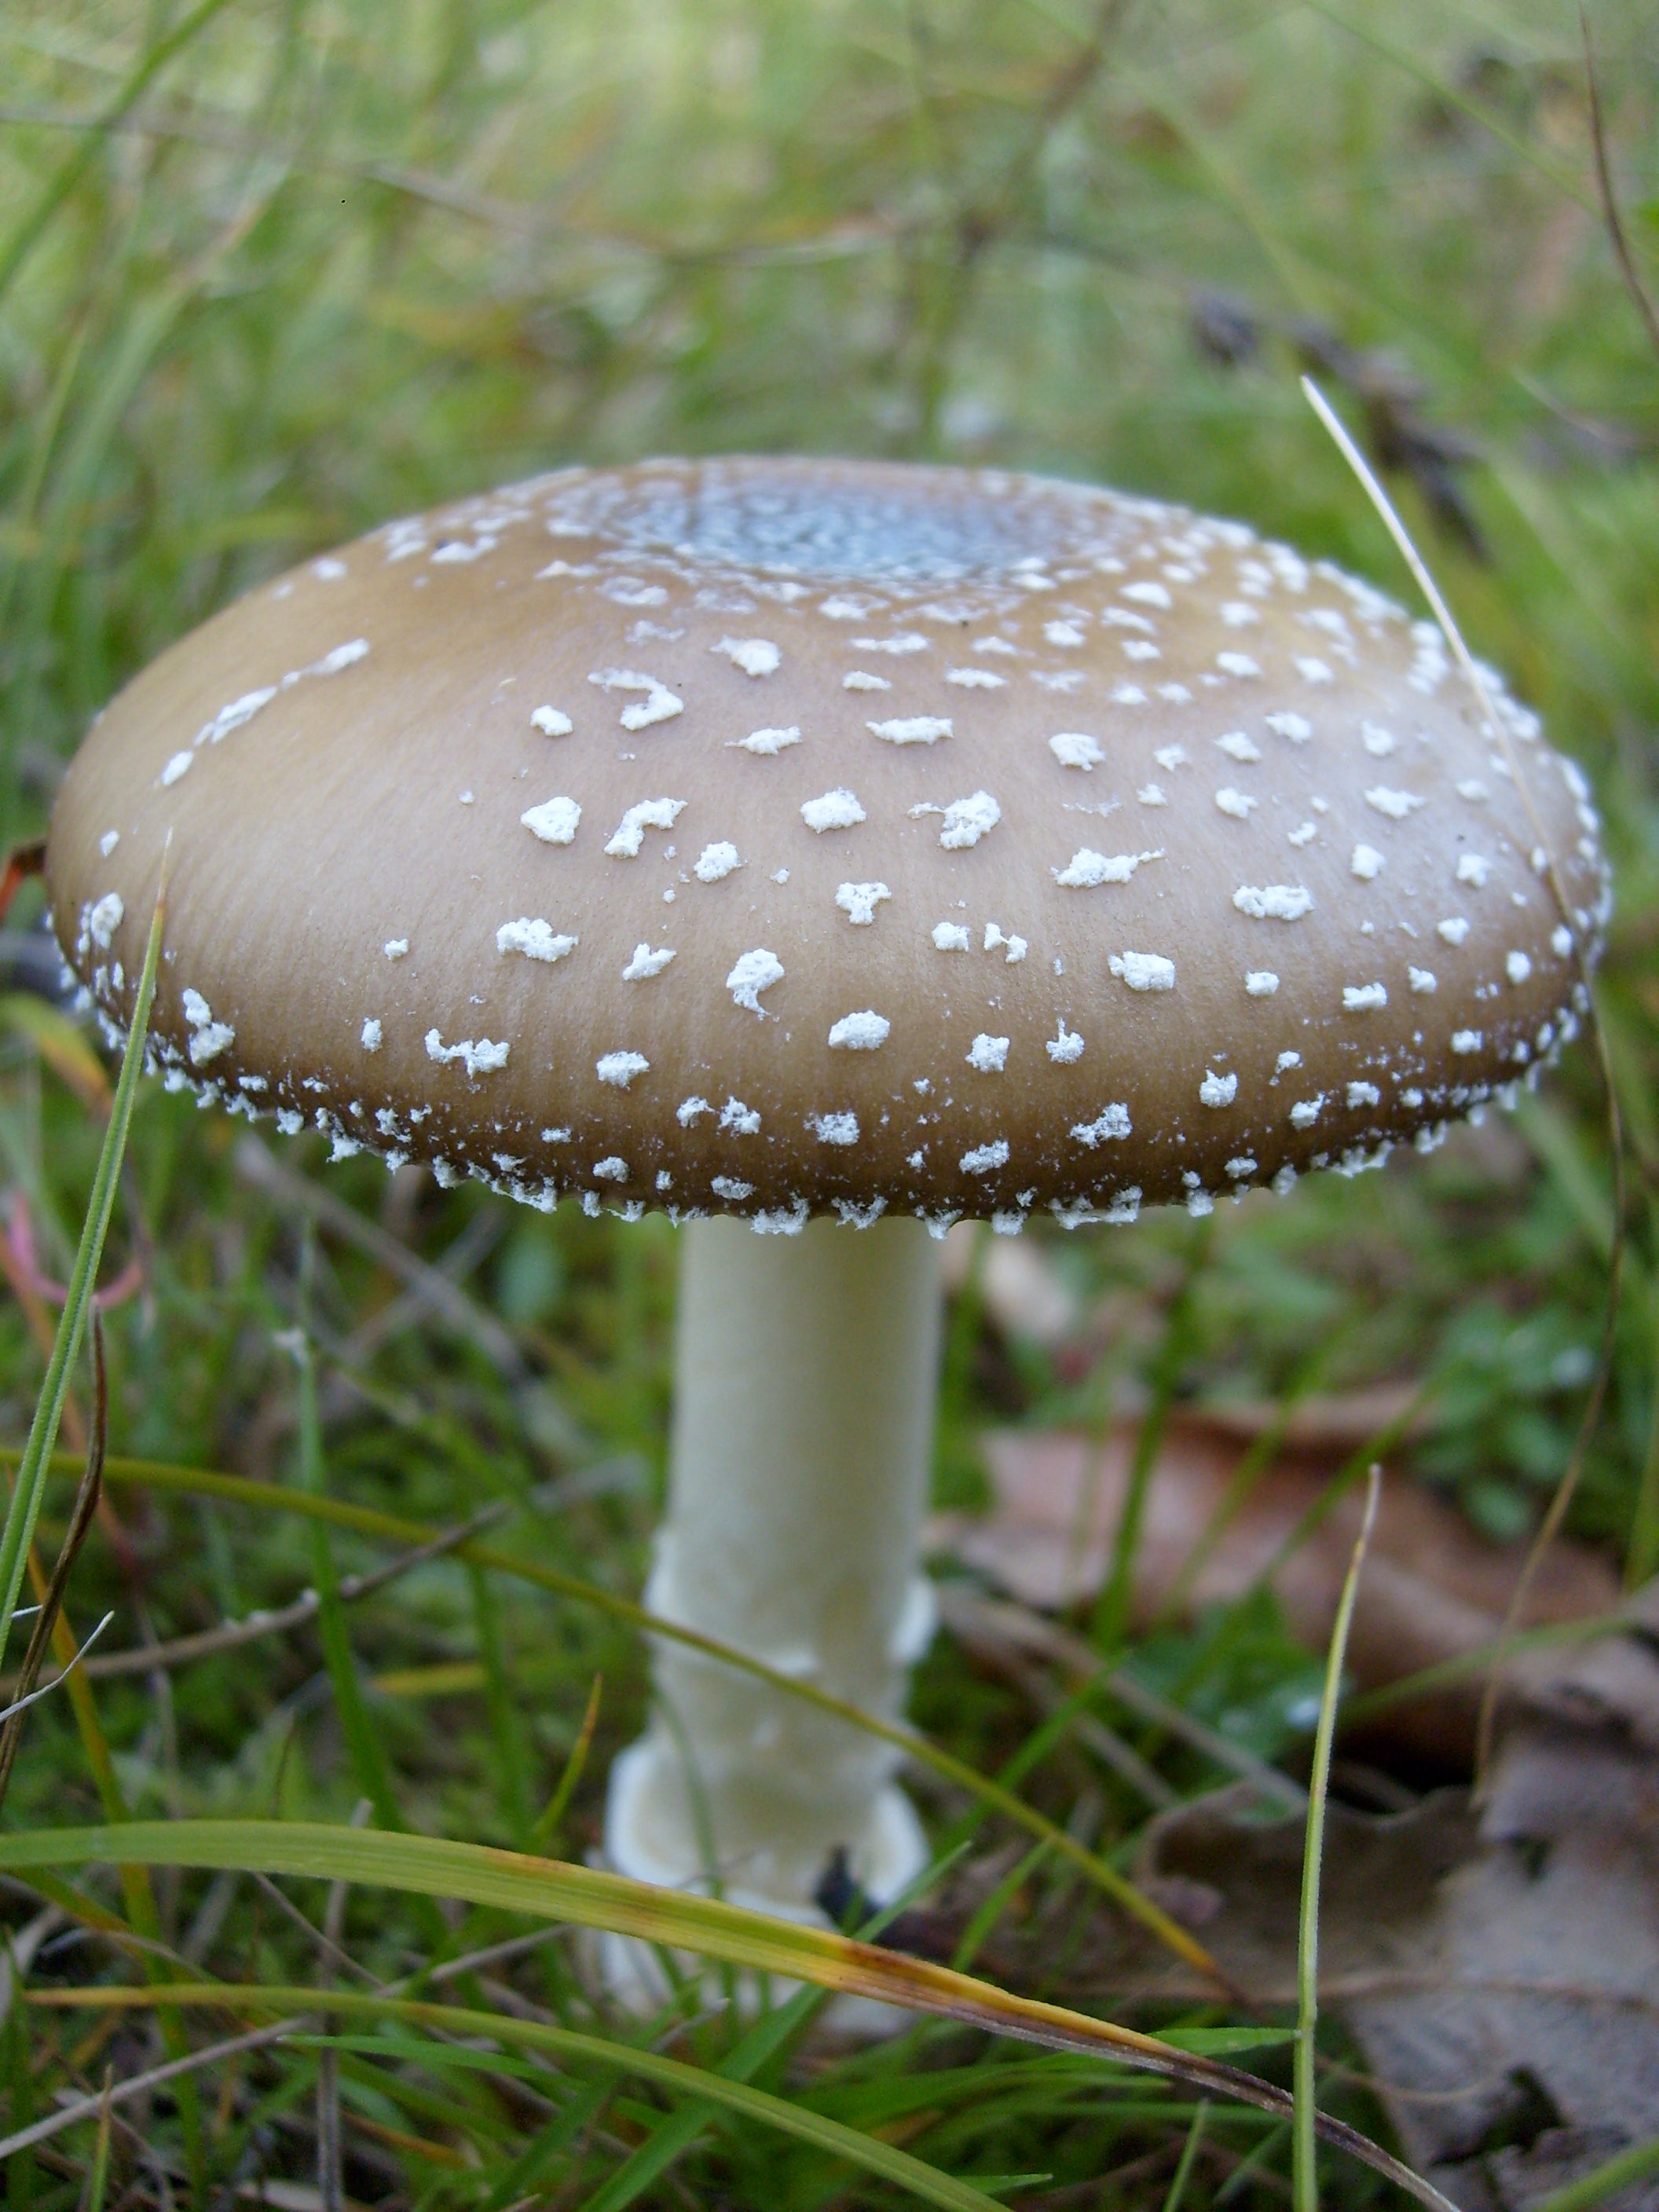 Panther Cap mushrooms are 5-12cm in diameter and are brown with white spots